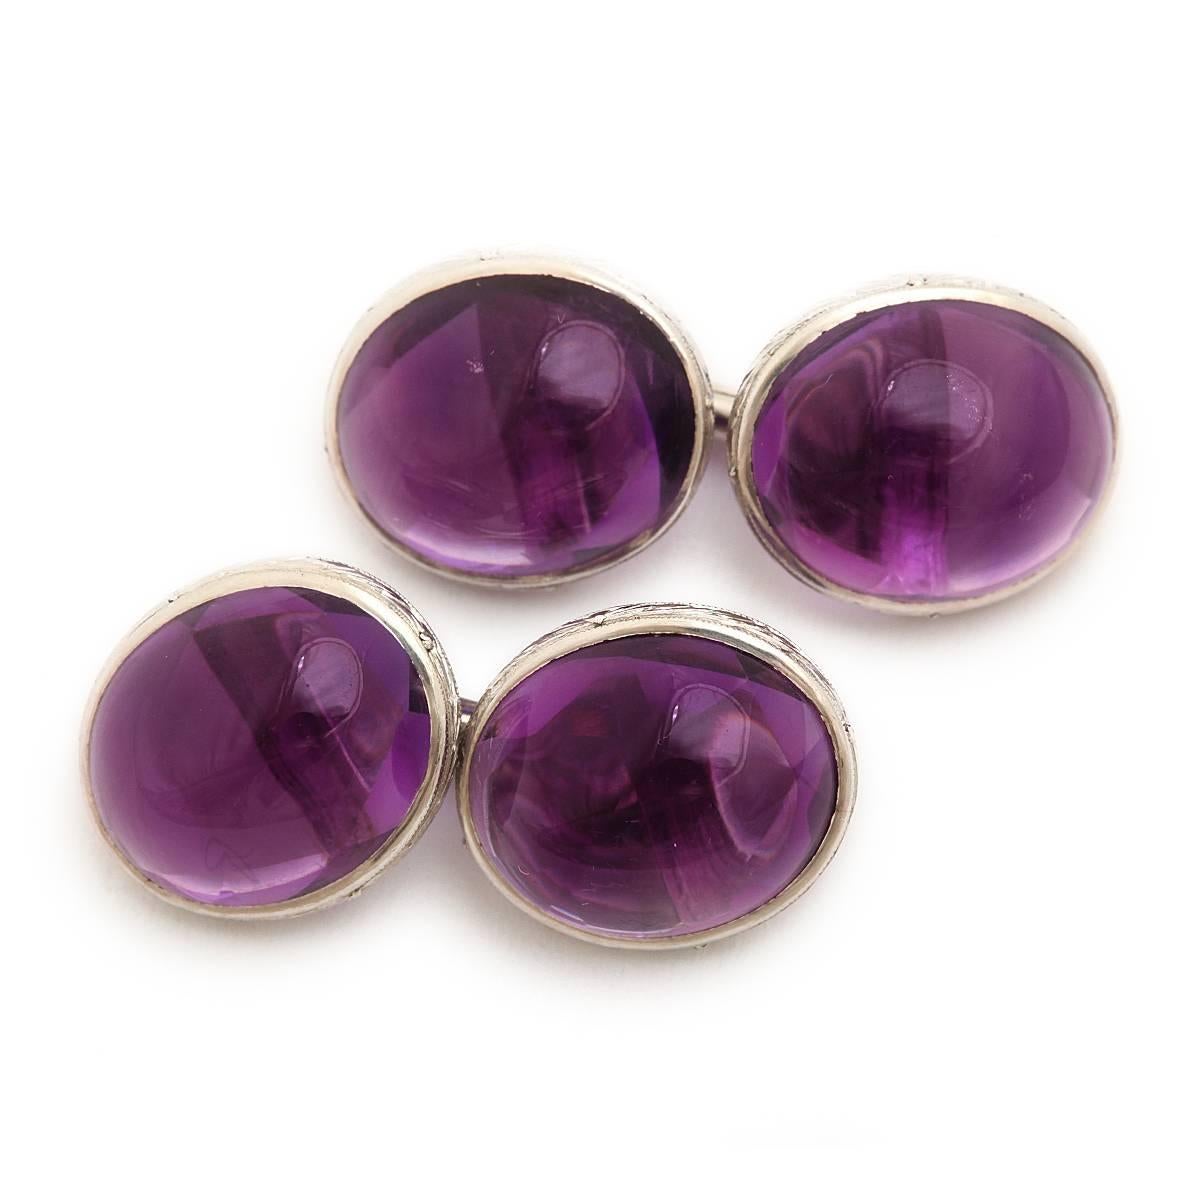 Antique cabochon amethyst double cufflinks, set in platinum. 

By Tiffany & Co, NY, ca. 1910  